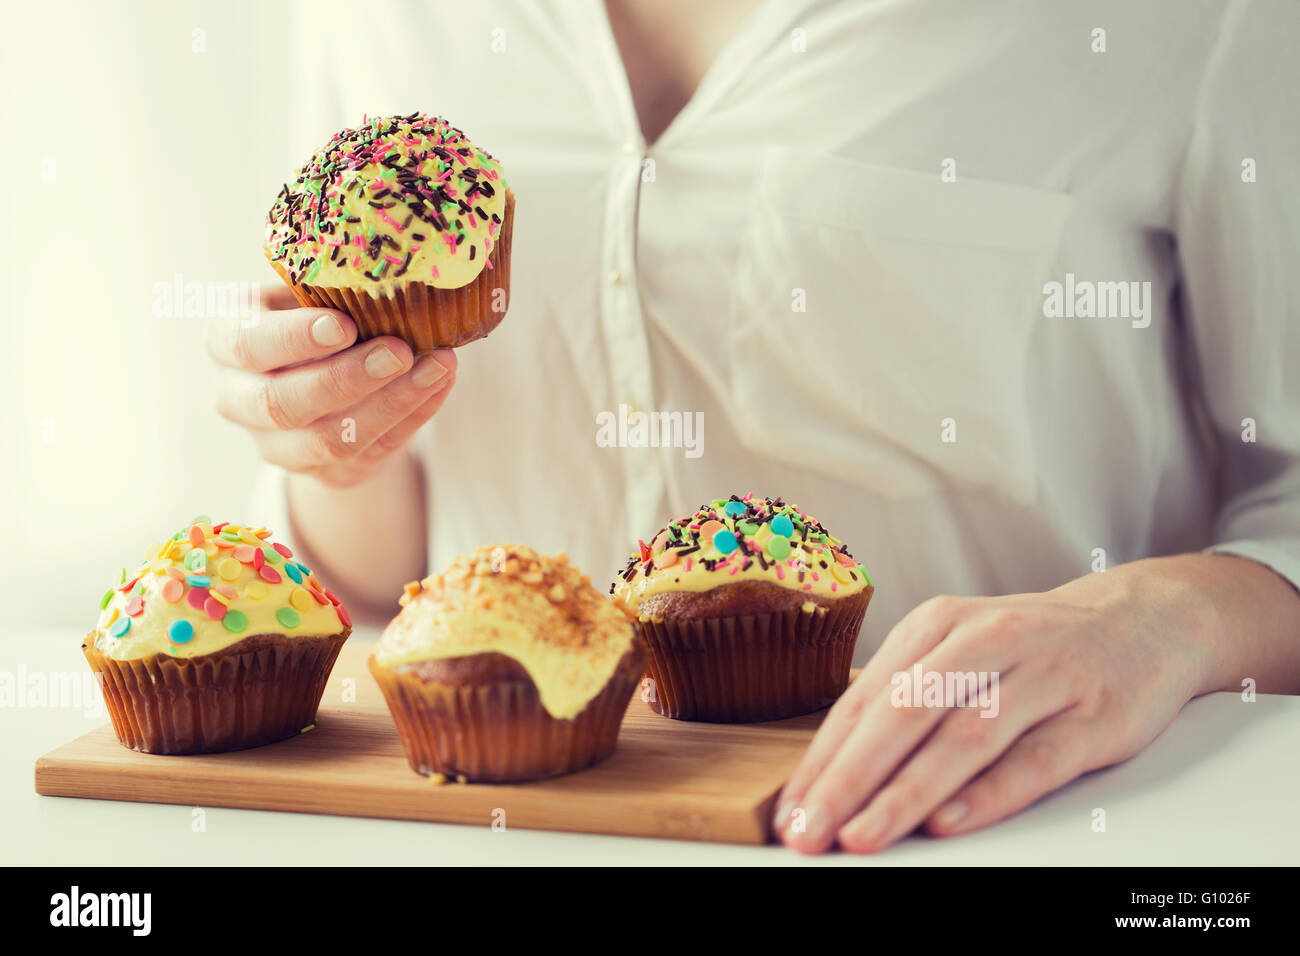 close up of woman with glazed cupcakes or muffins Stock Photo